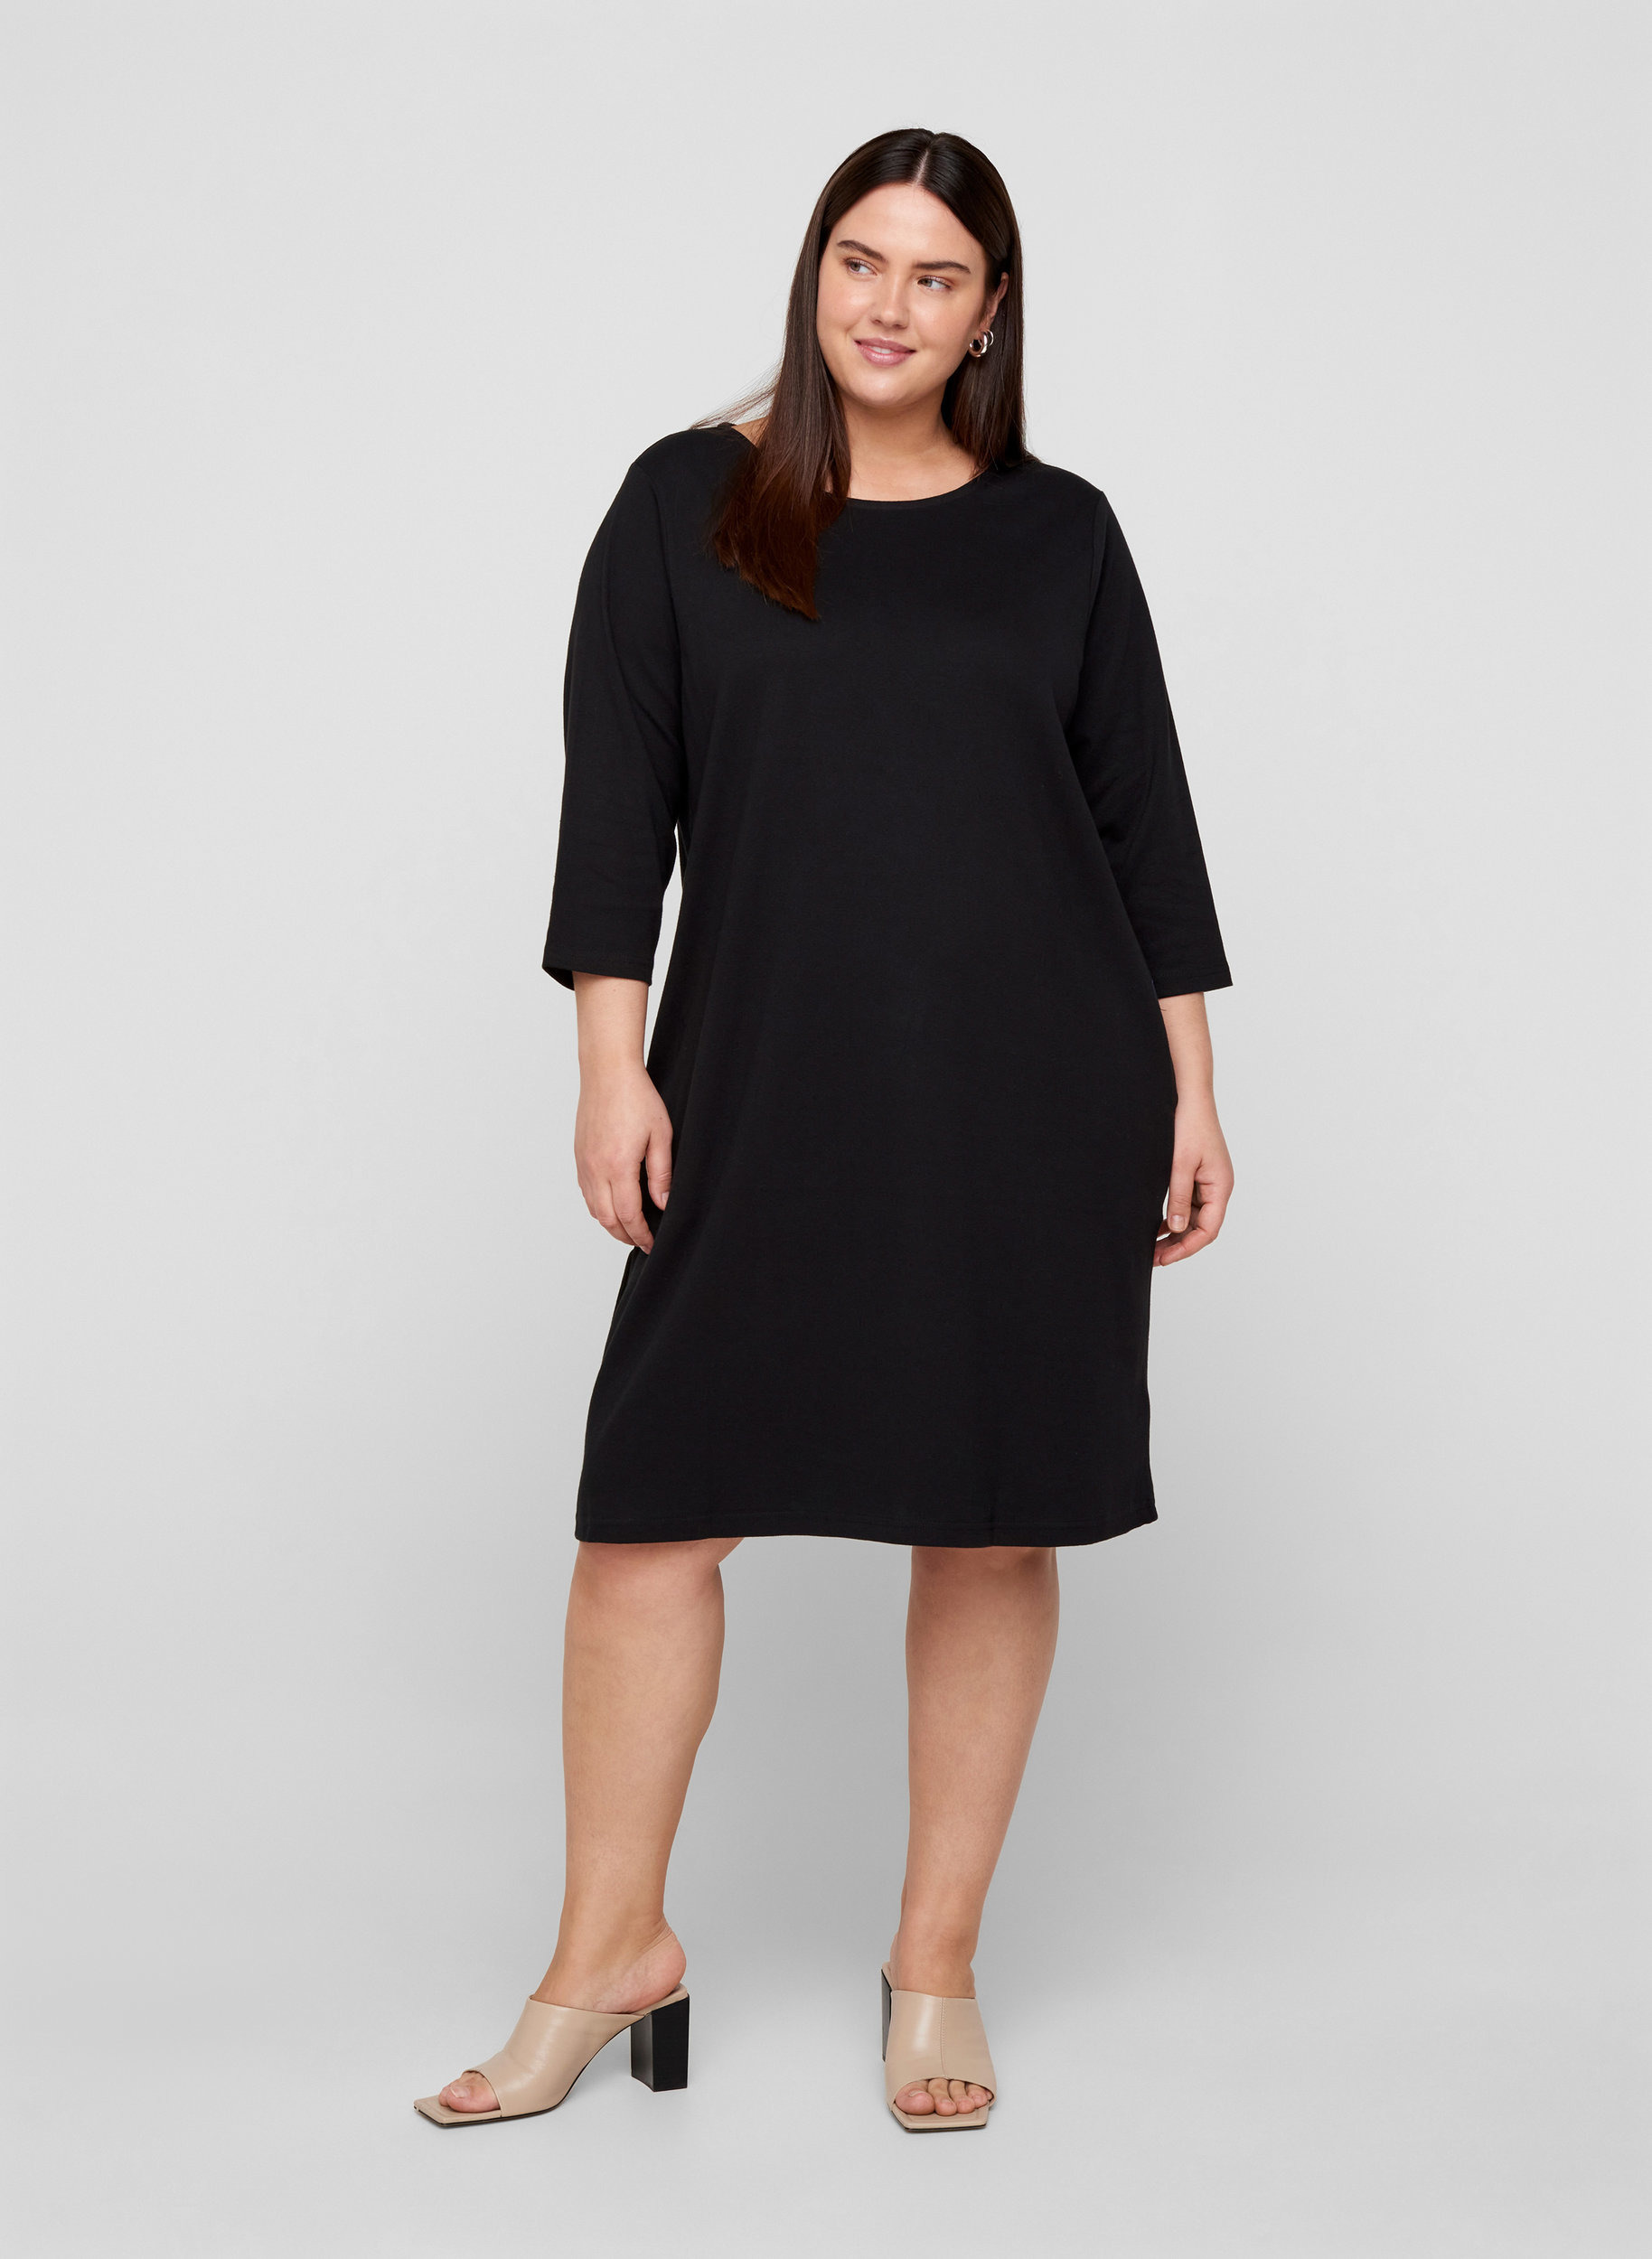 Cotton dress with 3/4 sleeves and ...